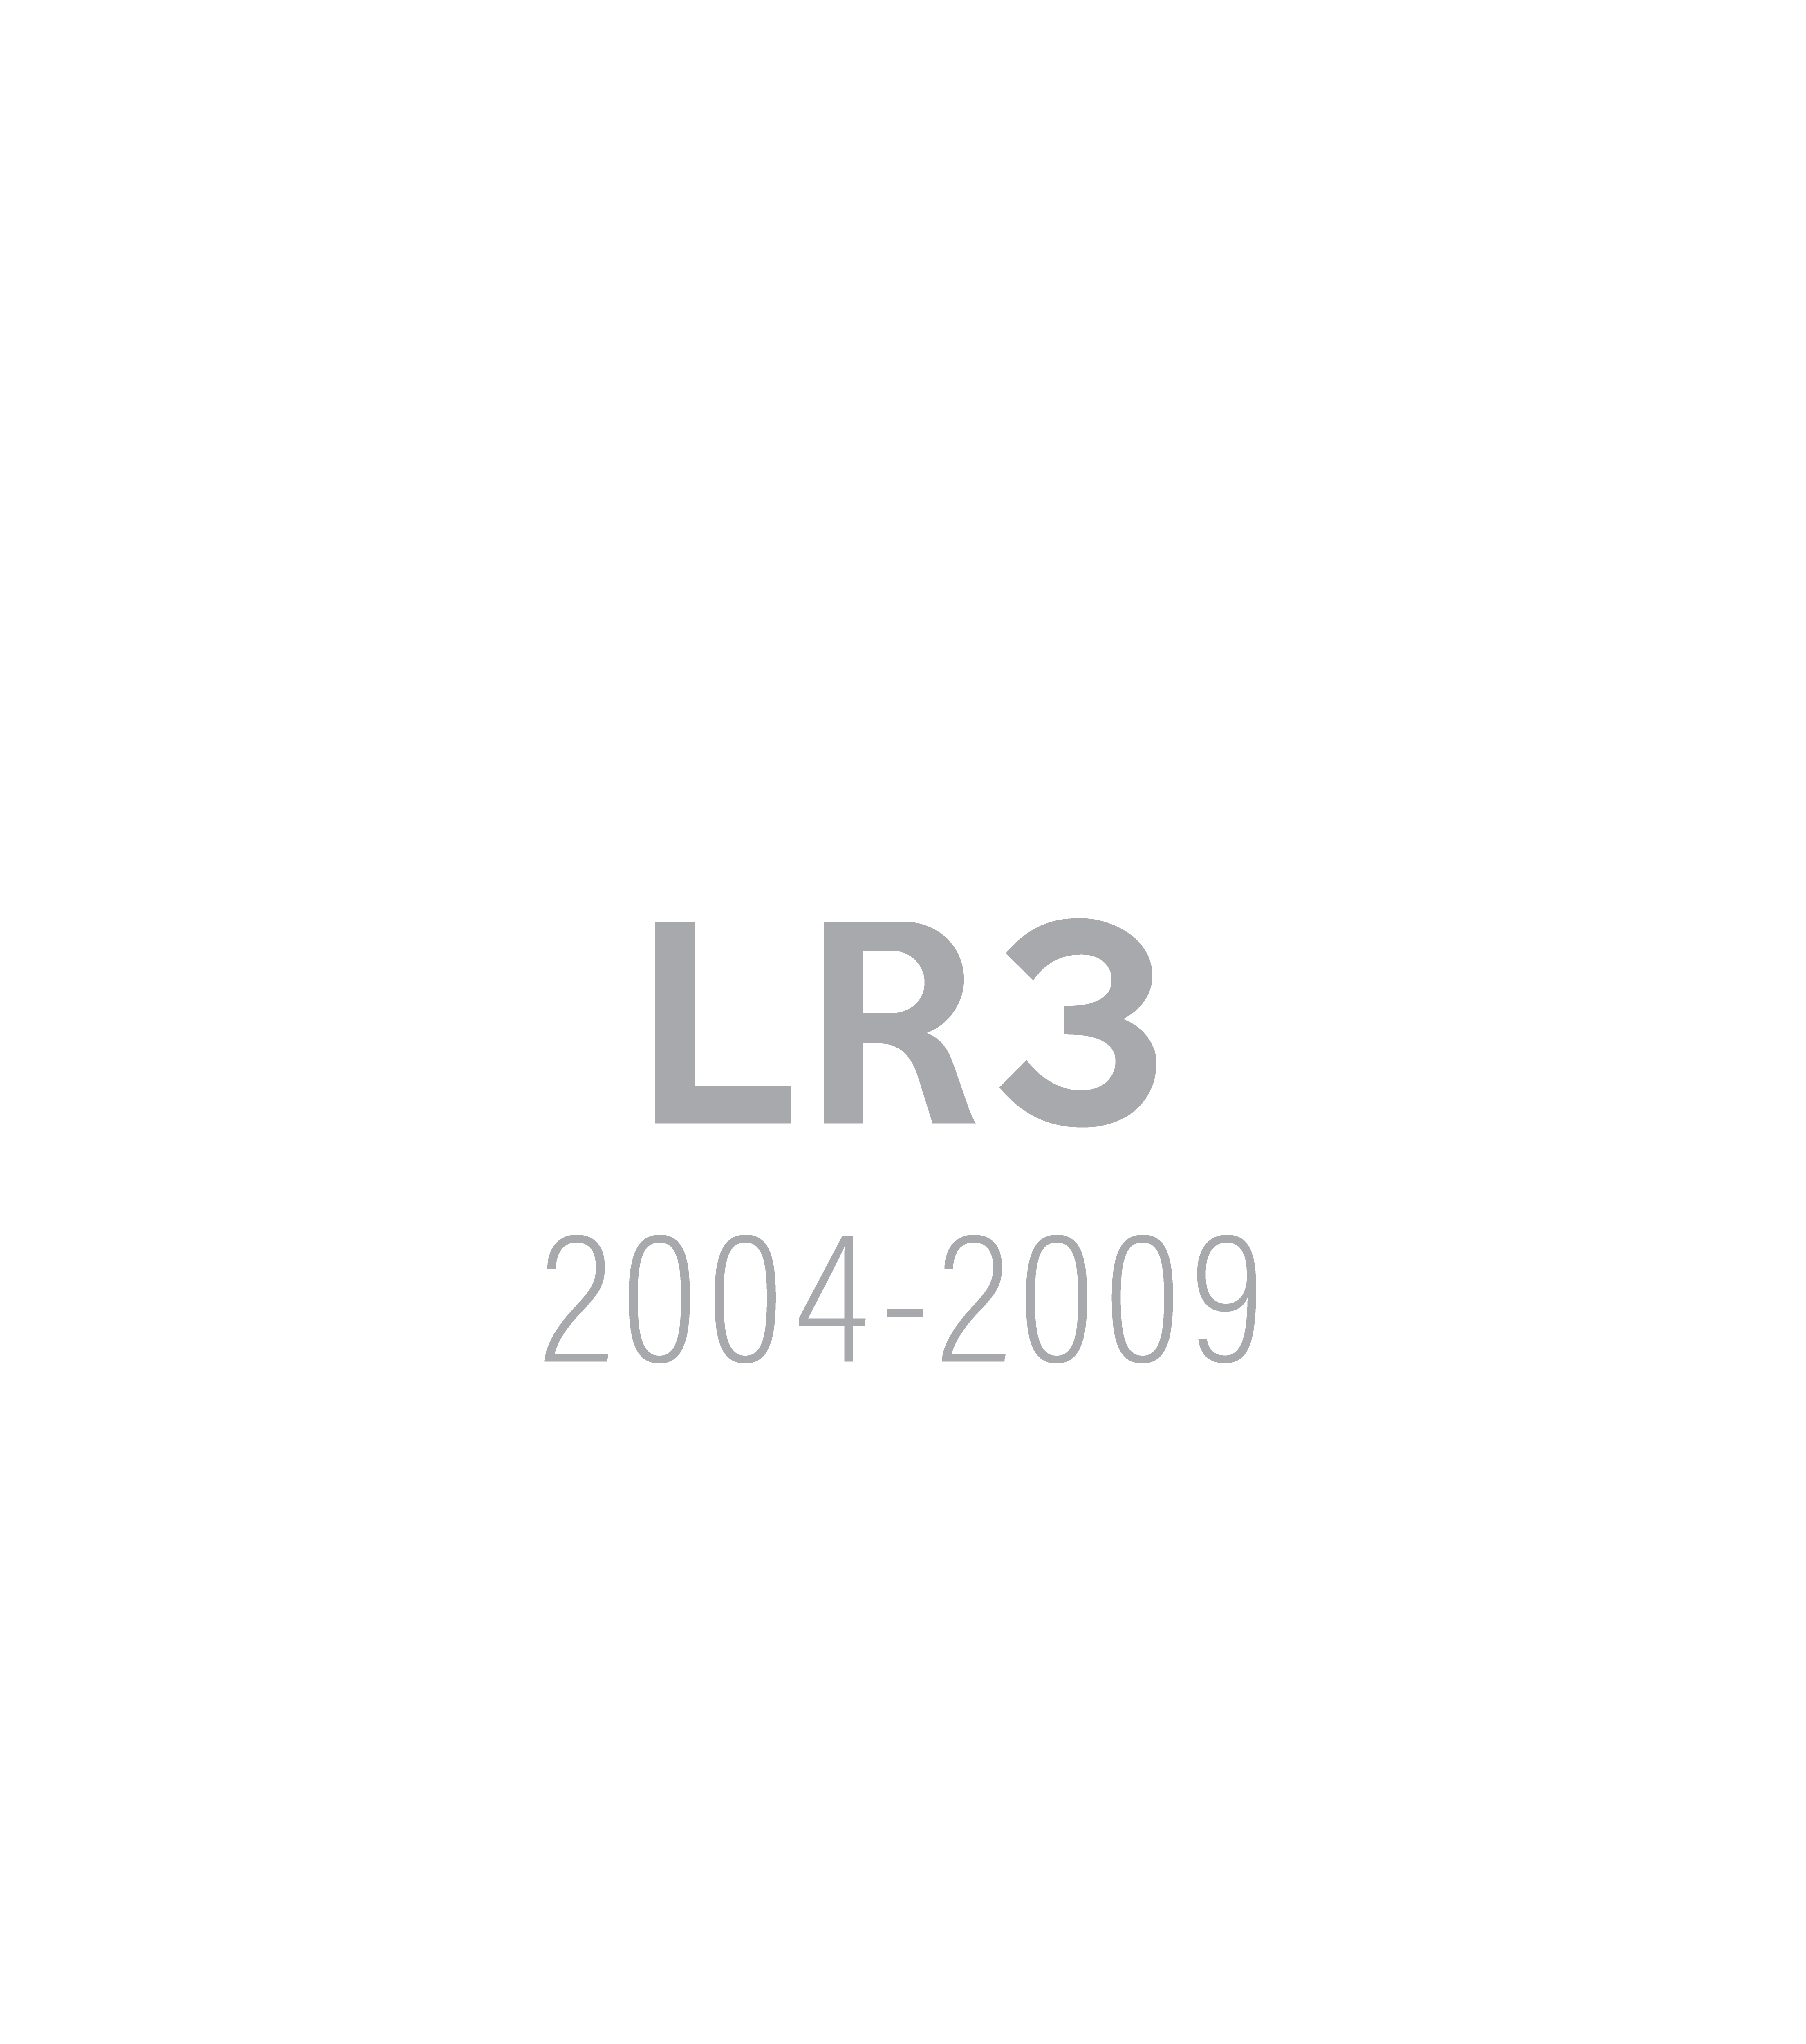 Land Rover Lr3 Gallery Cover Image